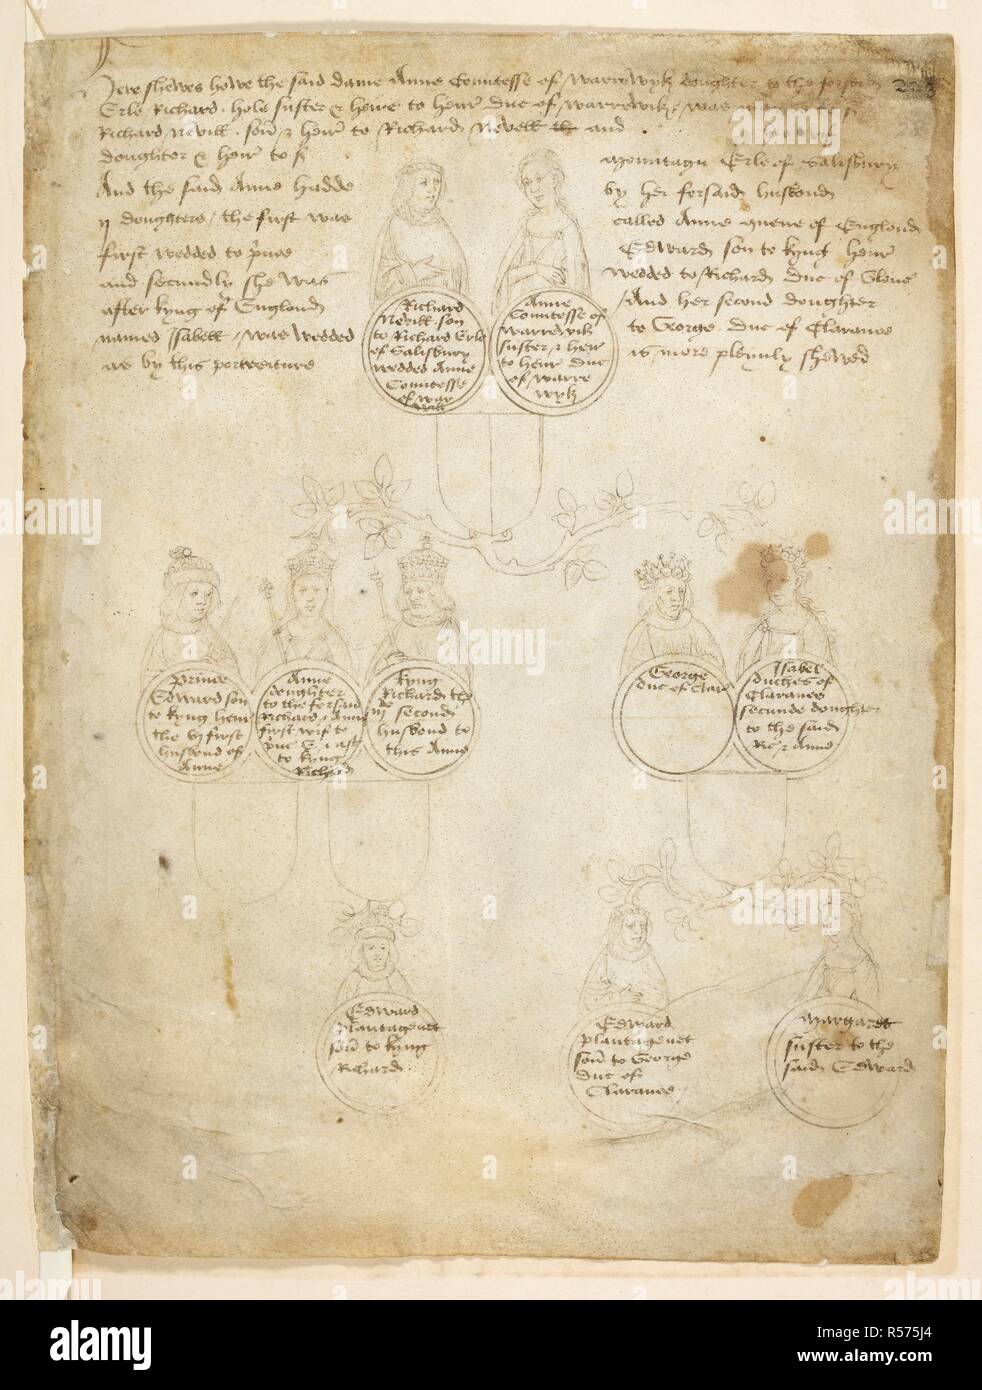 Pageant LV. Descendants of Countess Anne.  Drawings of Anne, Countess of Warwick, her husband Richard Neville. Below, her elder daughter Anne, with her first husband Prince Edward, second husband King Richard III, and their son Edward.The younger daughter Isabel, with her husband the Duke of Clarence, and their children Edward and Margaret. Beauchamp Pageants. S. Netherlands [Bruges?]; after 1483. Source: Cotton Julius E. IV, art. 6, f.28. Language: English. Stock Photo